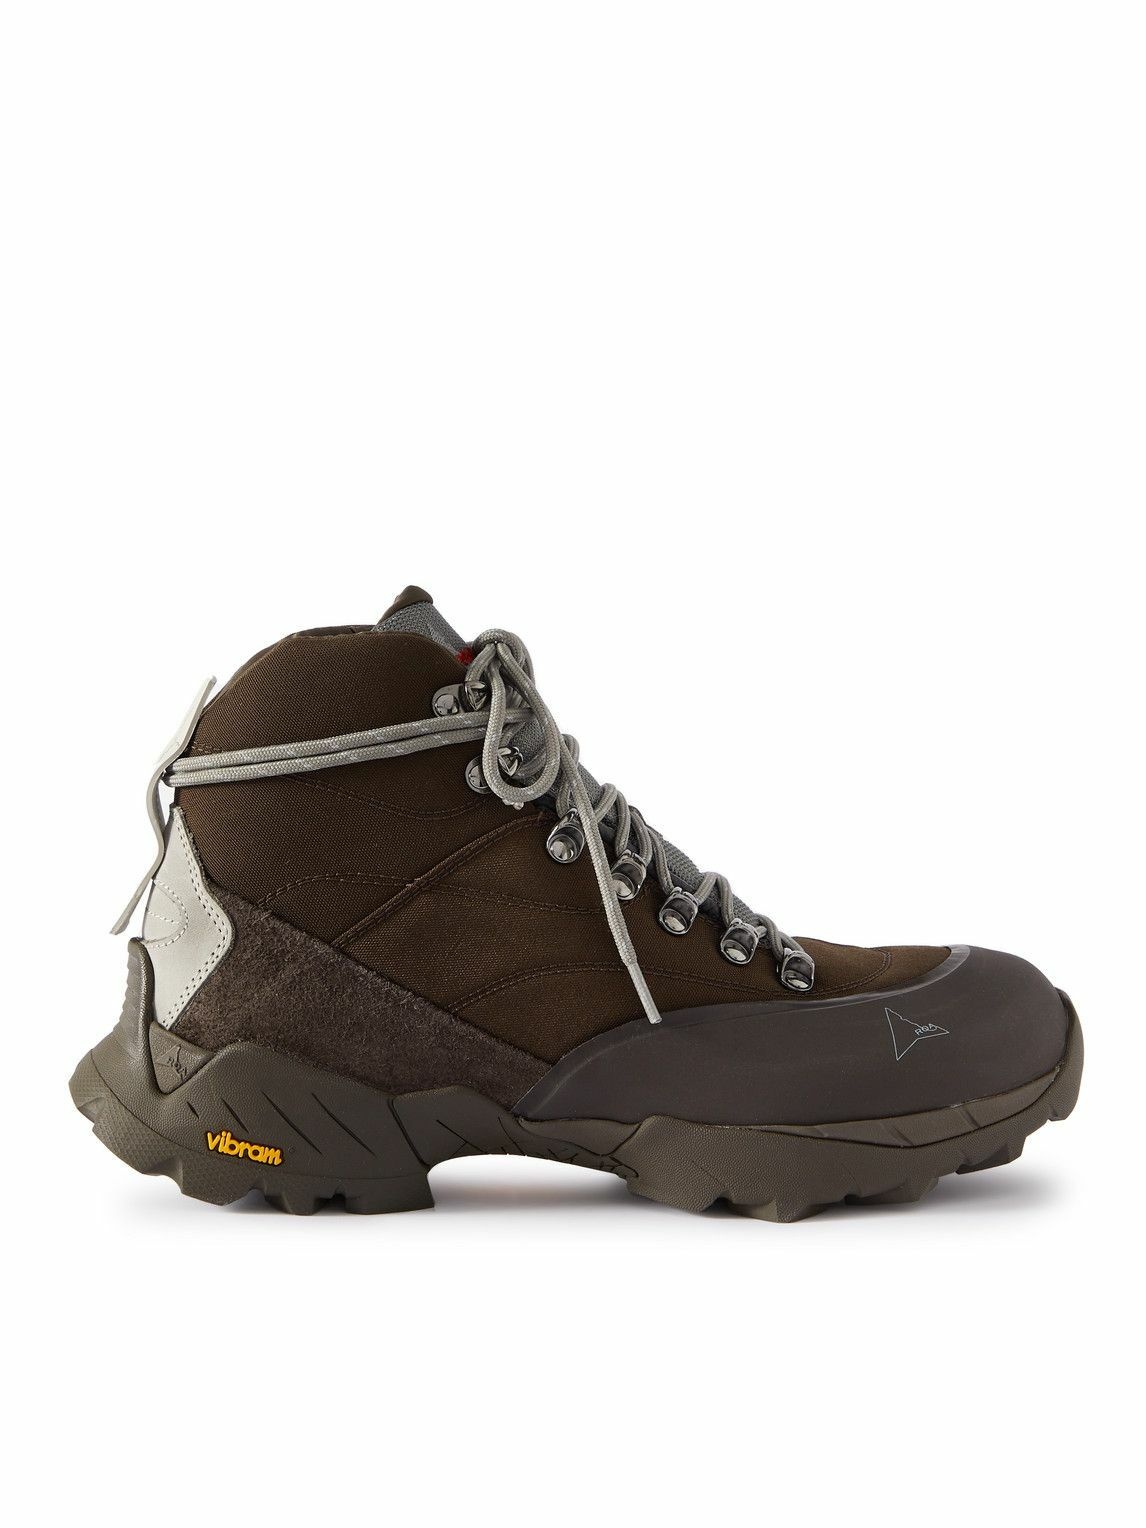 ROA - Mesh, Suede, Rubber and Canvas Hiking Boots - Brown ROA